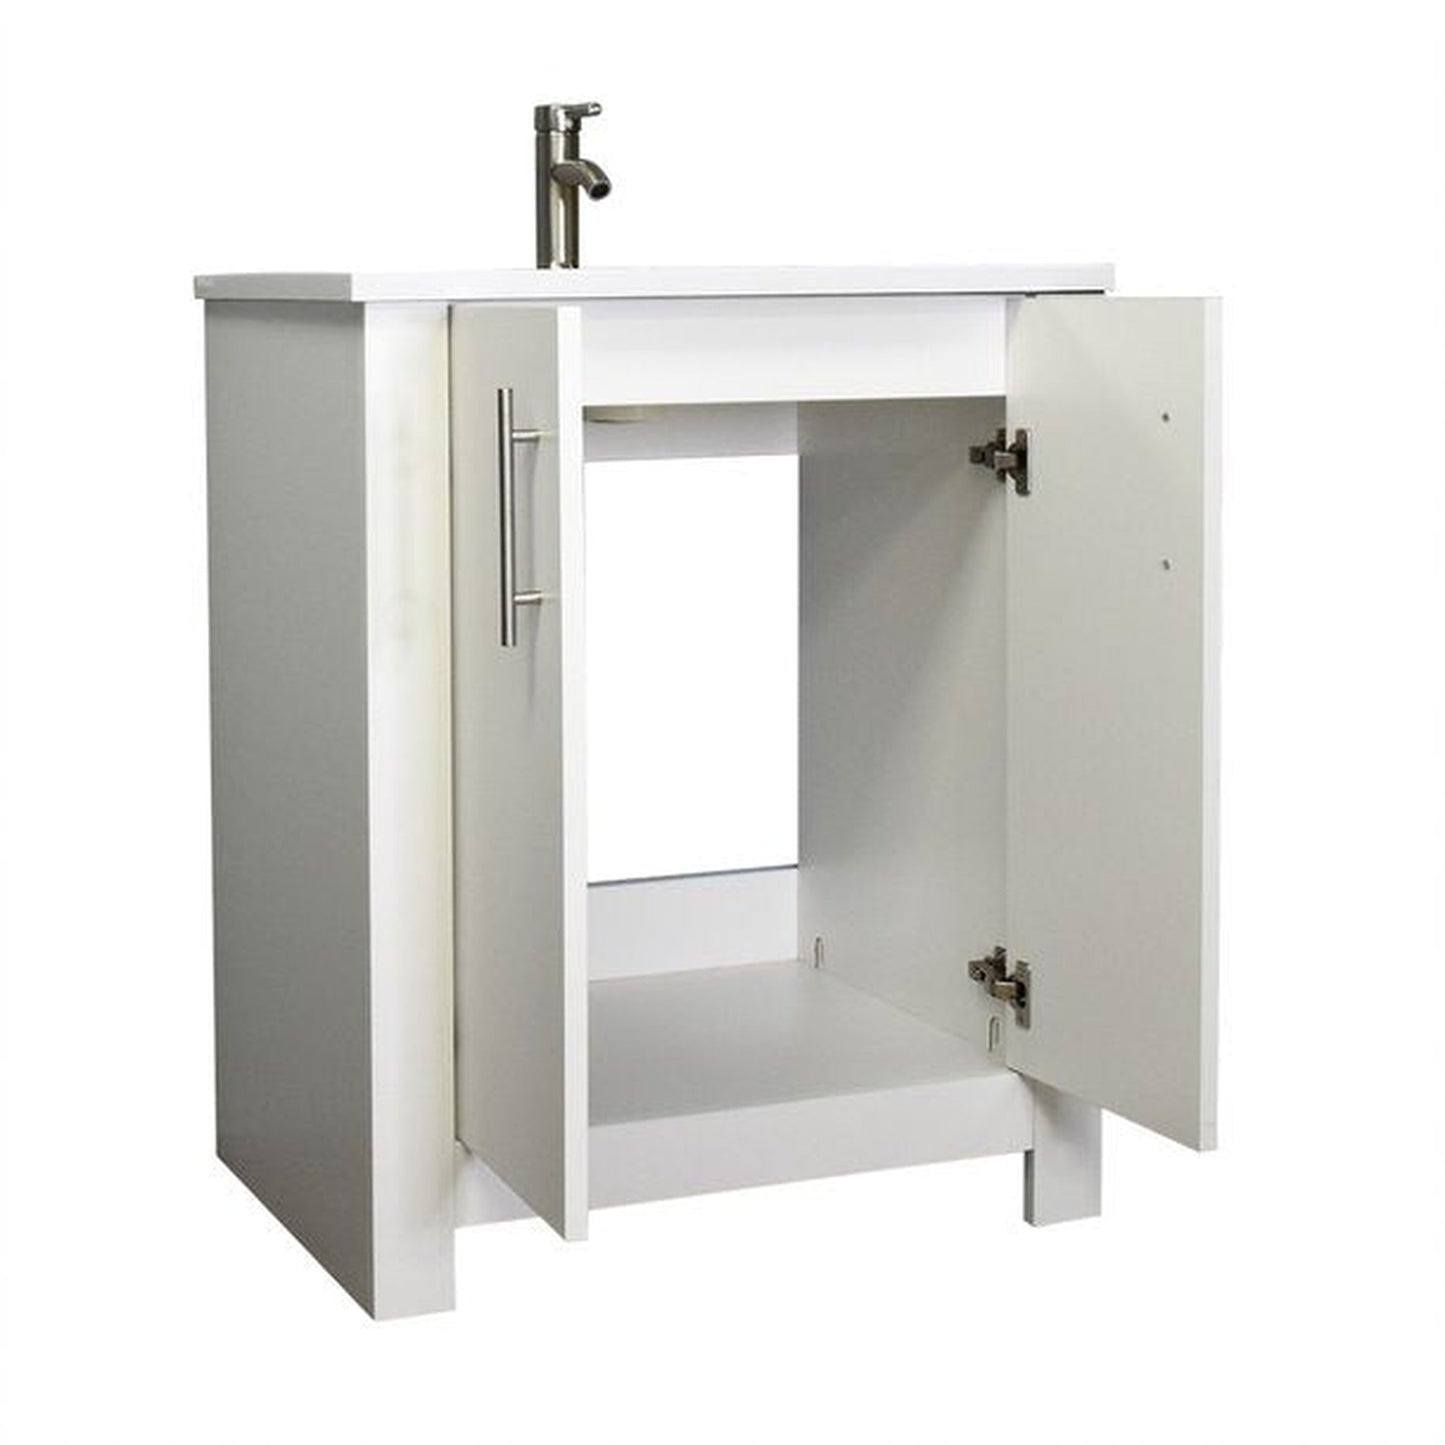 Volpa USA Austin 24" x 20" White Modern Freestanding Bathroom Vanity With Acrylic Top, Integrated Acrylic Sink And Brushed Nickel Handles